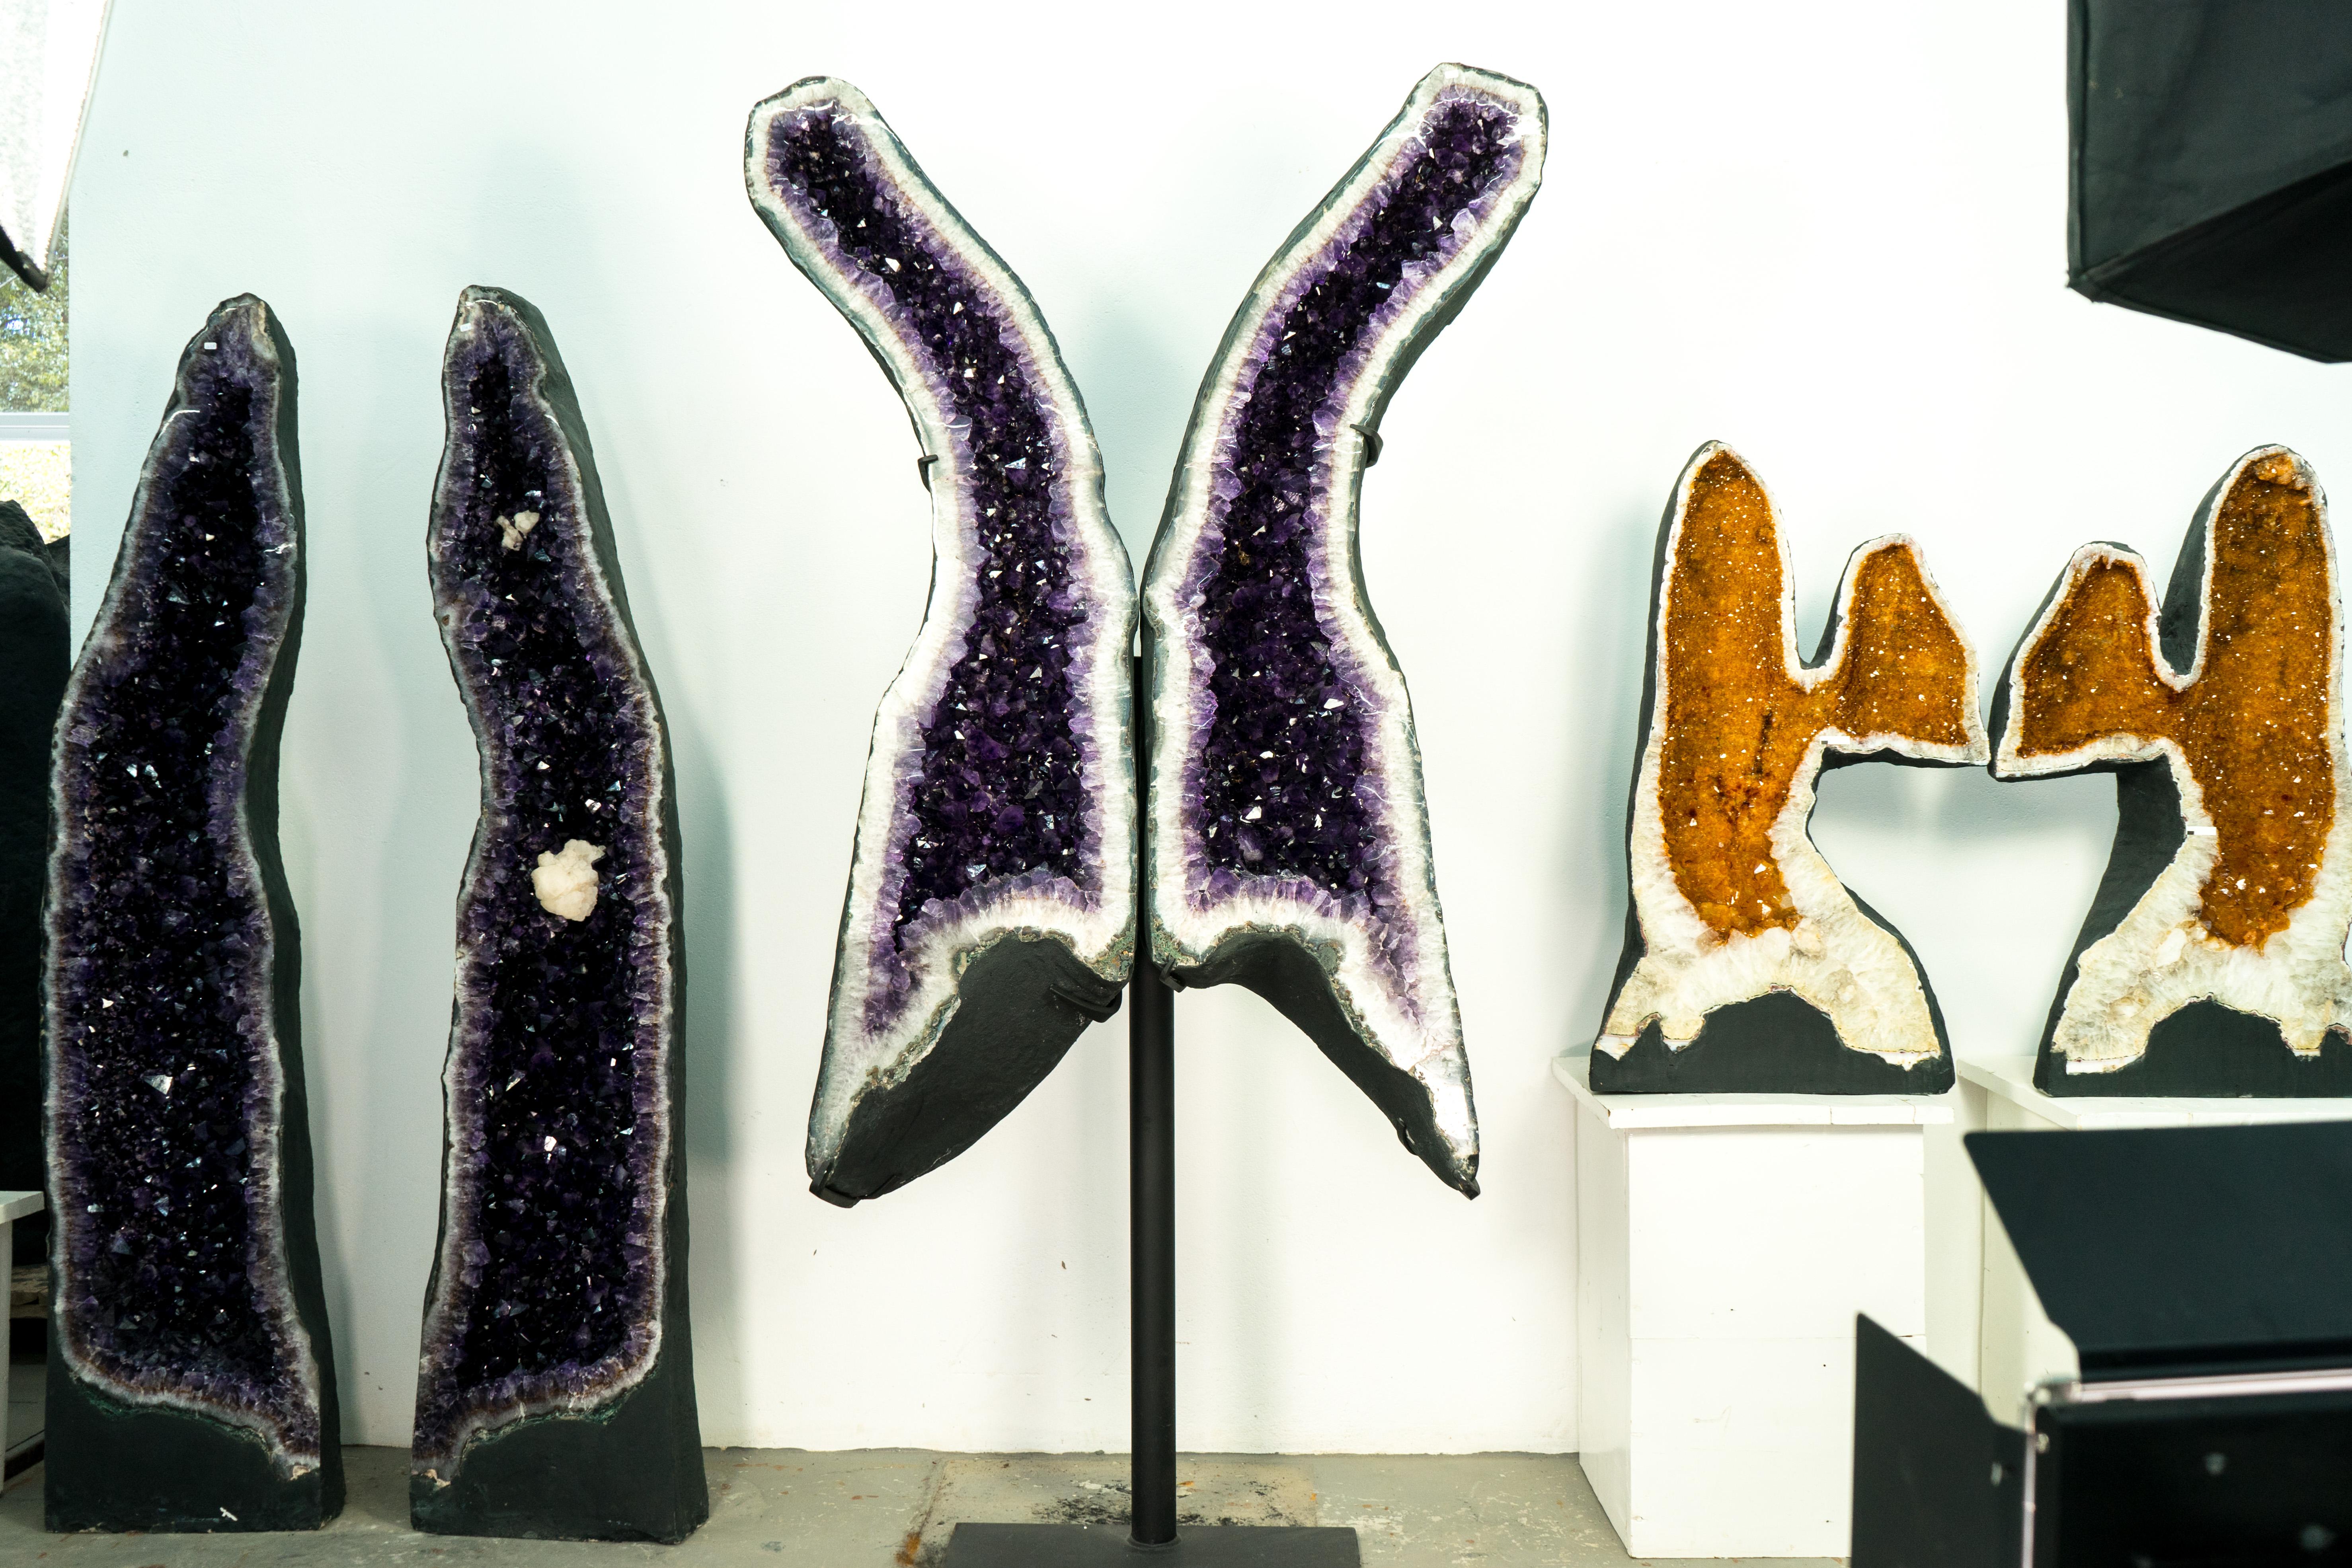 Rare Giant AAA Amethyst Wings: 2 Meters (6.4 Feet) Tall, High-Grade Aesthetic Amethyst to Elevate Any Space or Collection

▫️ Description

Our Giant AAA Amethyst Wings, standing 2 meters tall and growing like incomparable sculptures, will elevate